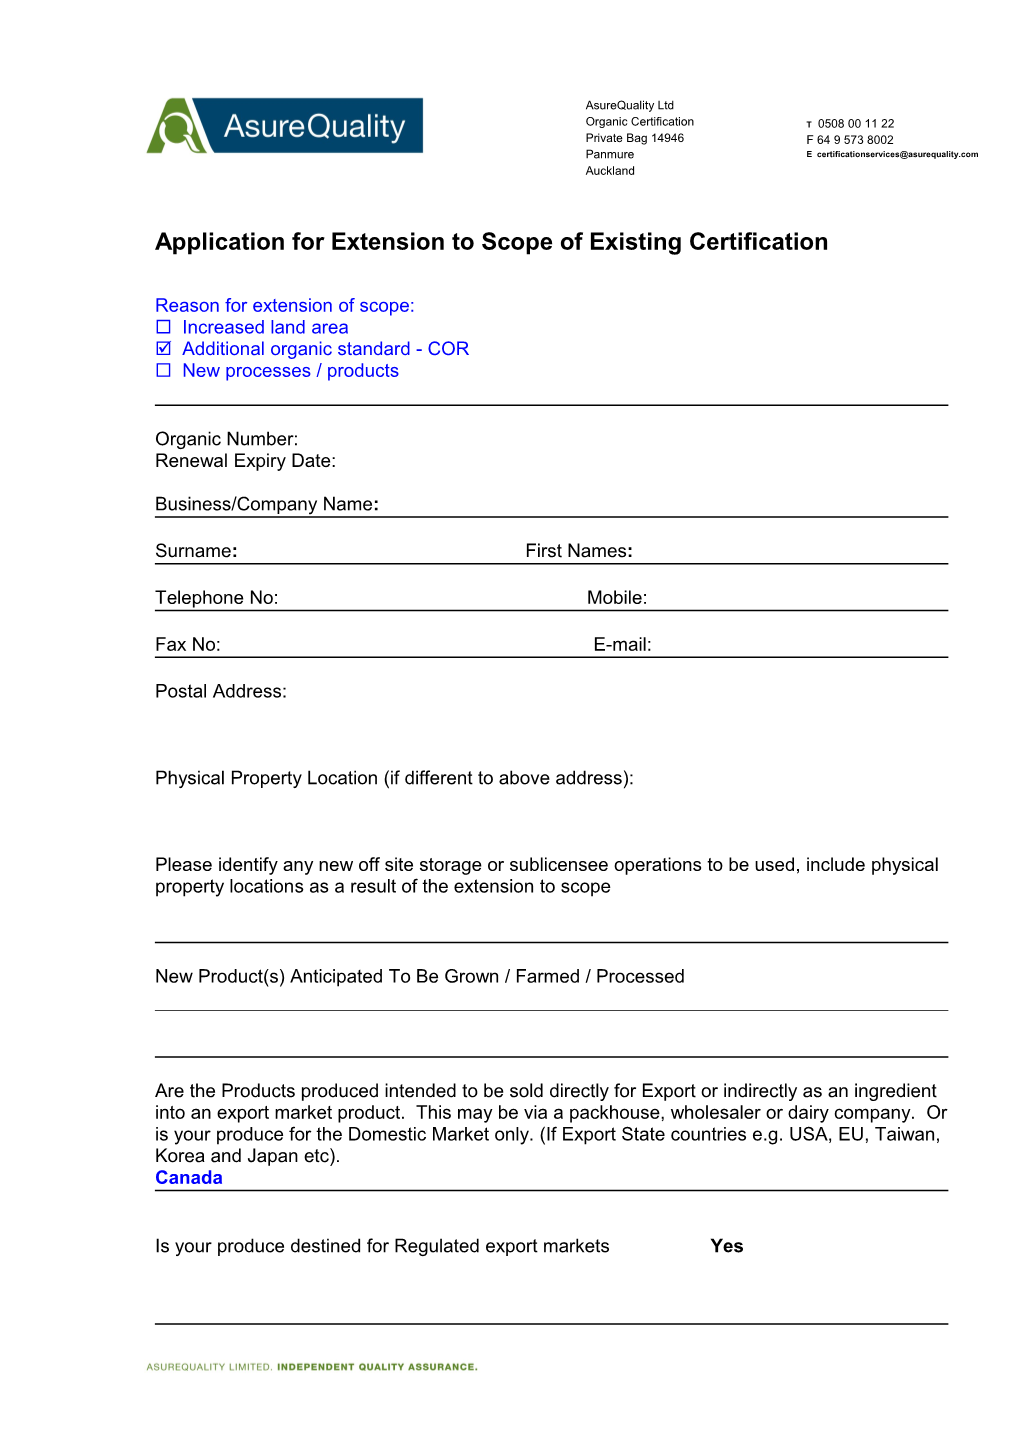 Application for Extension to Scope of Existing Certification